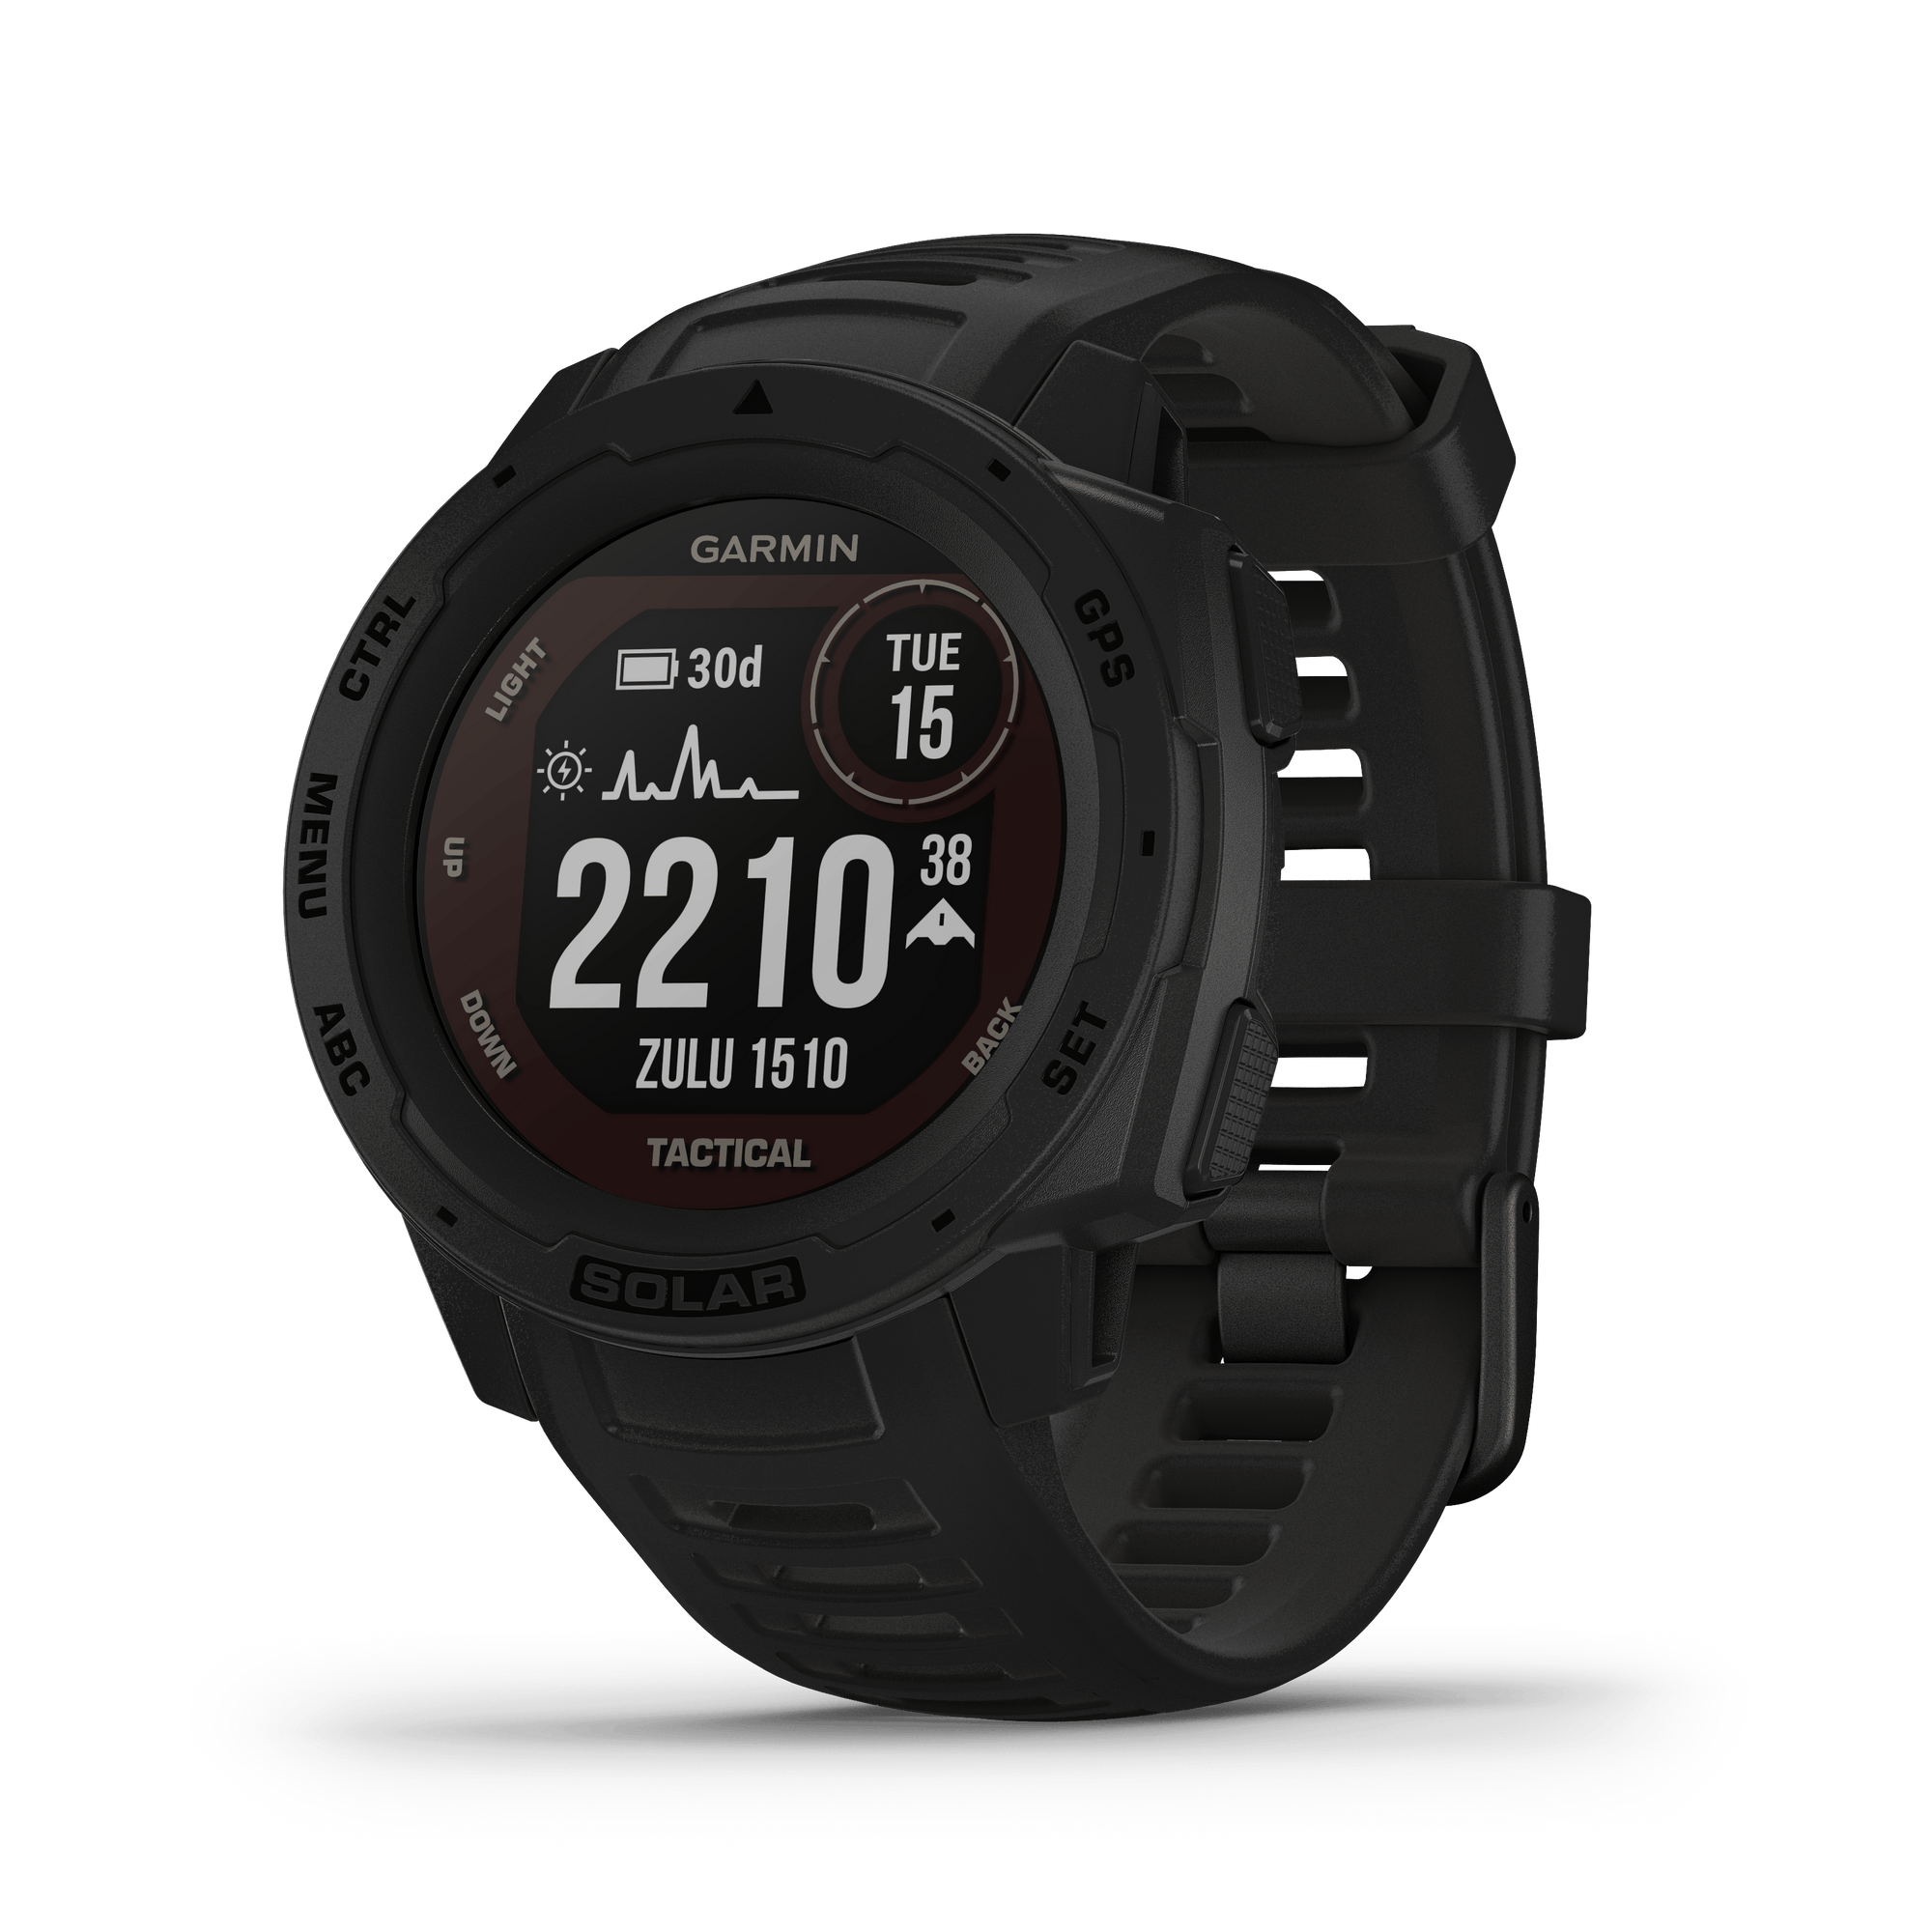  Fit for 9 Peak Pro Watch Accessories Intended for